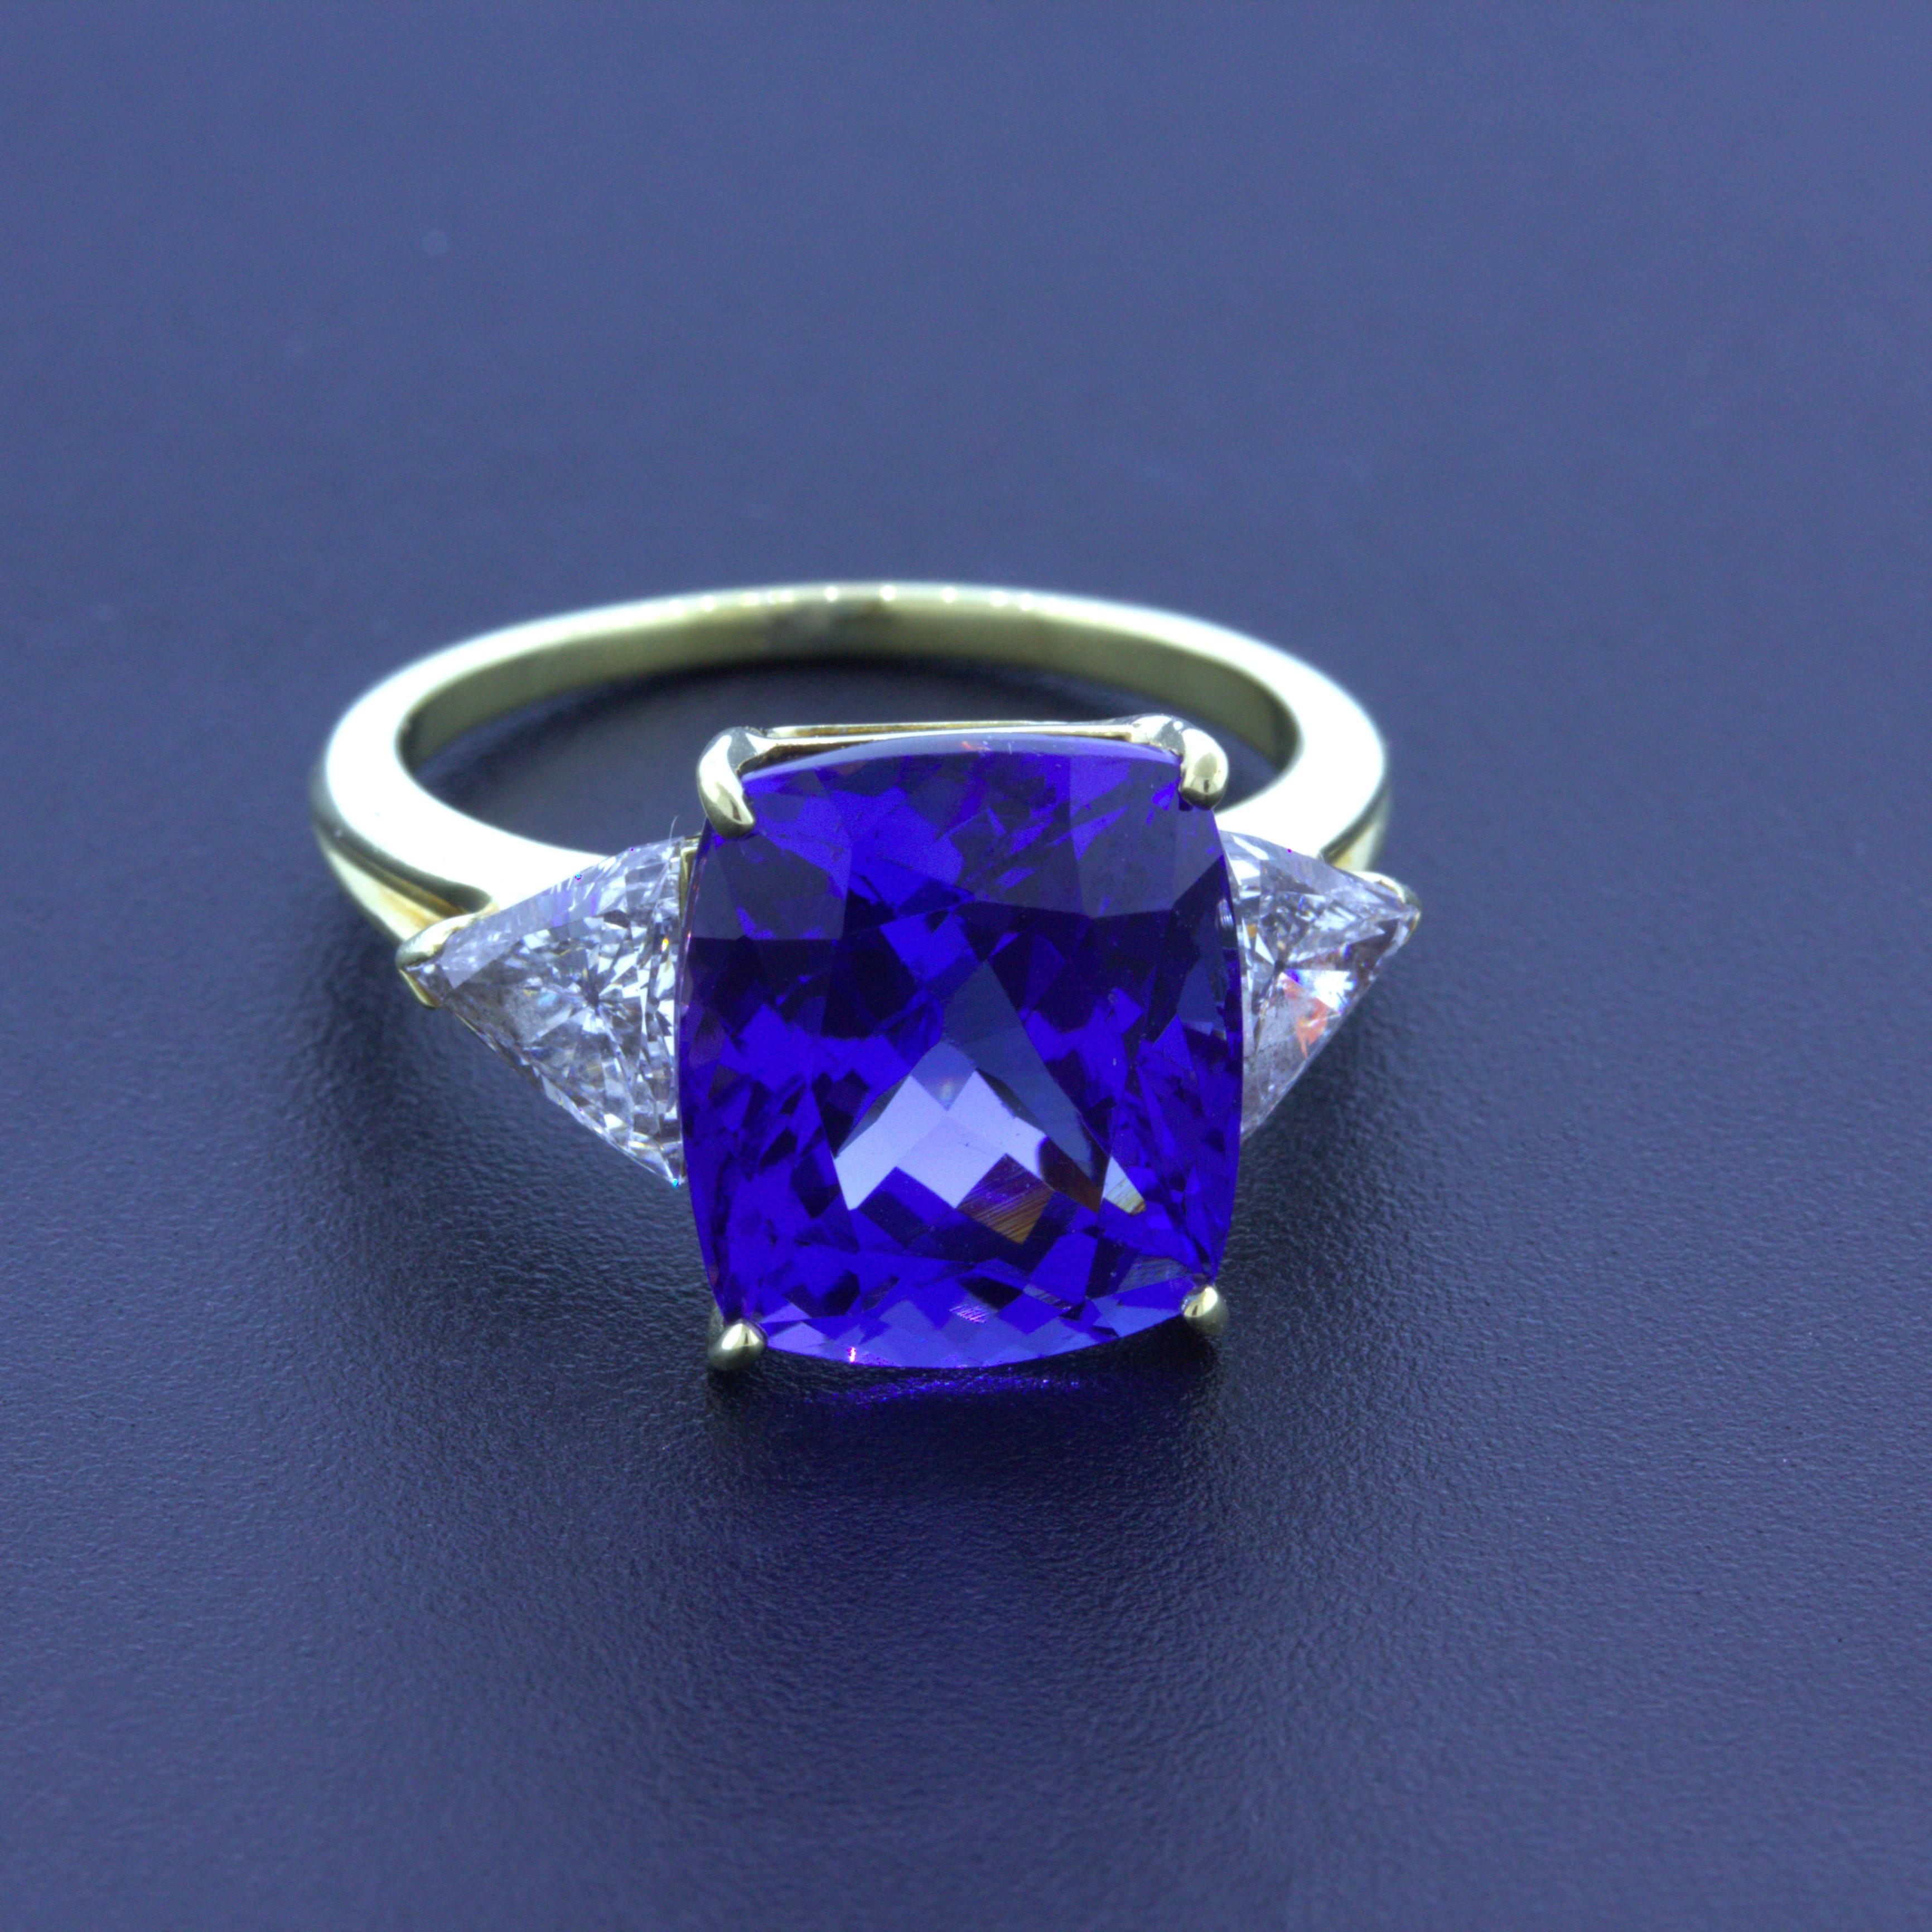 A chic and classy 3-stone ring that will stand the test of time! It features a beautiful 9.80 carat cushion-shape tanzanite which has a velvety purple-blue color with excellent brilliance and sparkle. It is complemented by two large triangular-cut